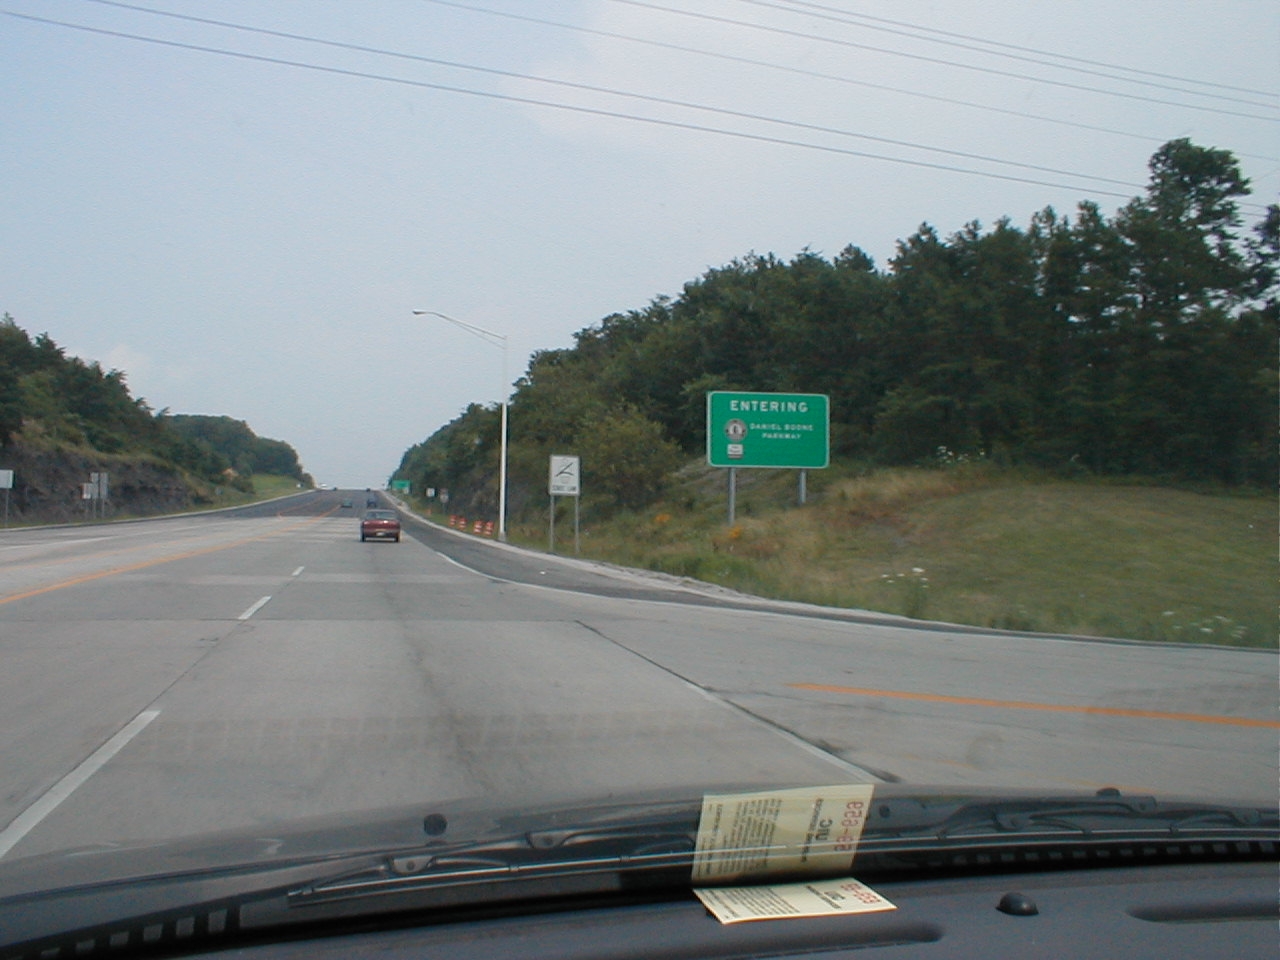 "Entering Daniel Boone Parkway" (Sign includes both Daniel Boone Parkway sign and Hal Rogers Parkway sign.)